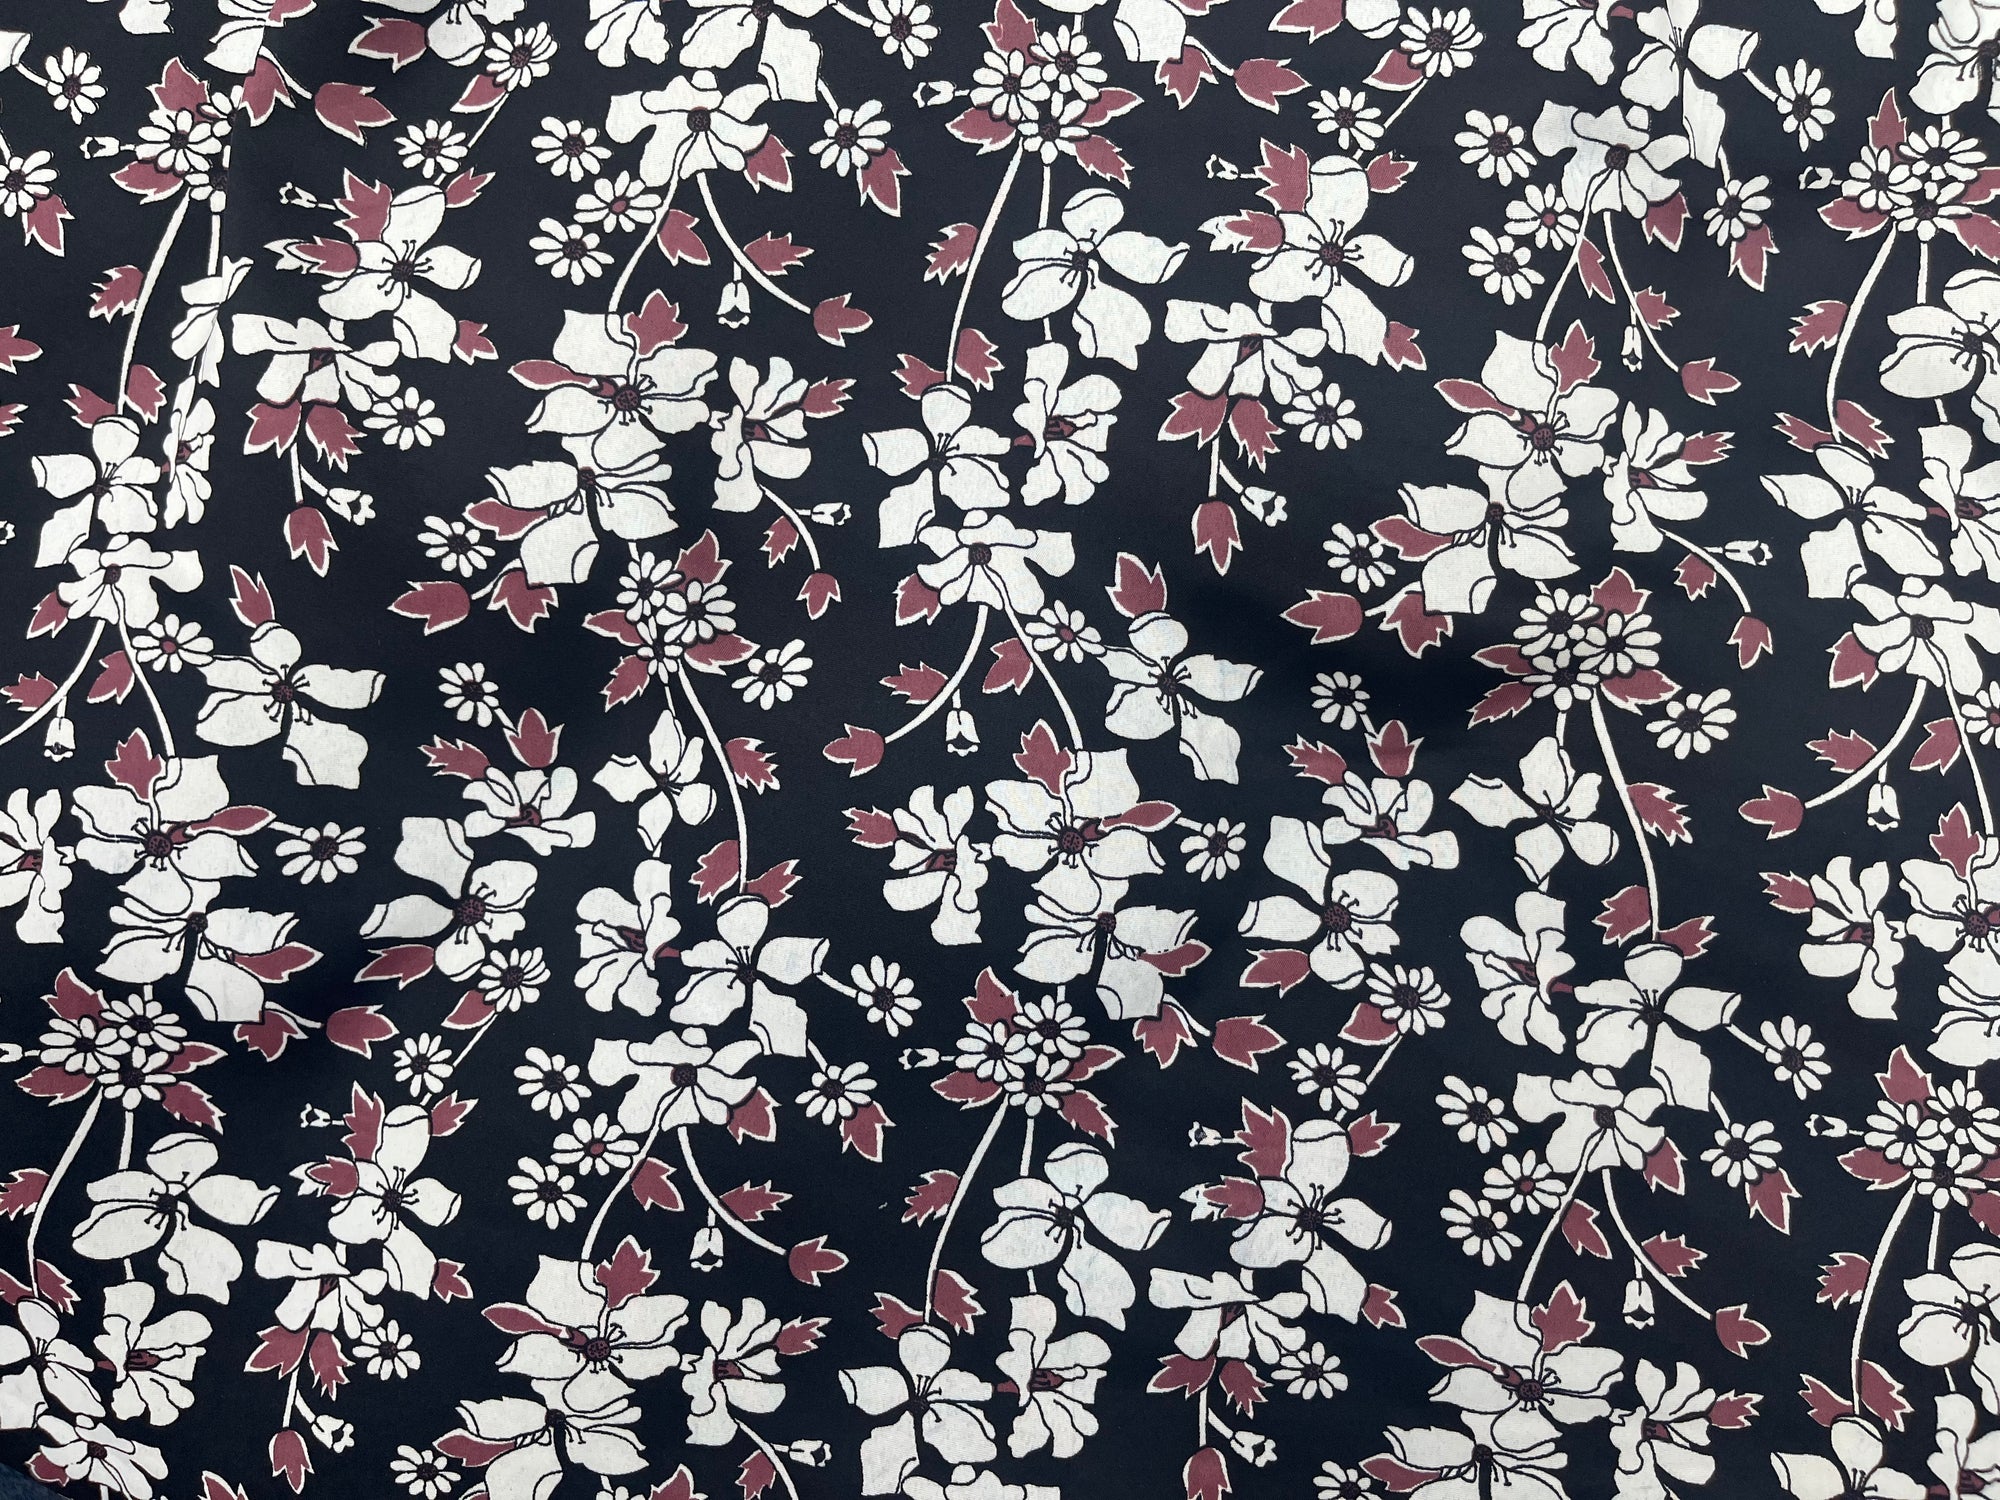 Cassia - Clearance Printed Crepe Fabric